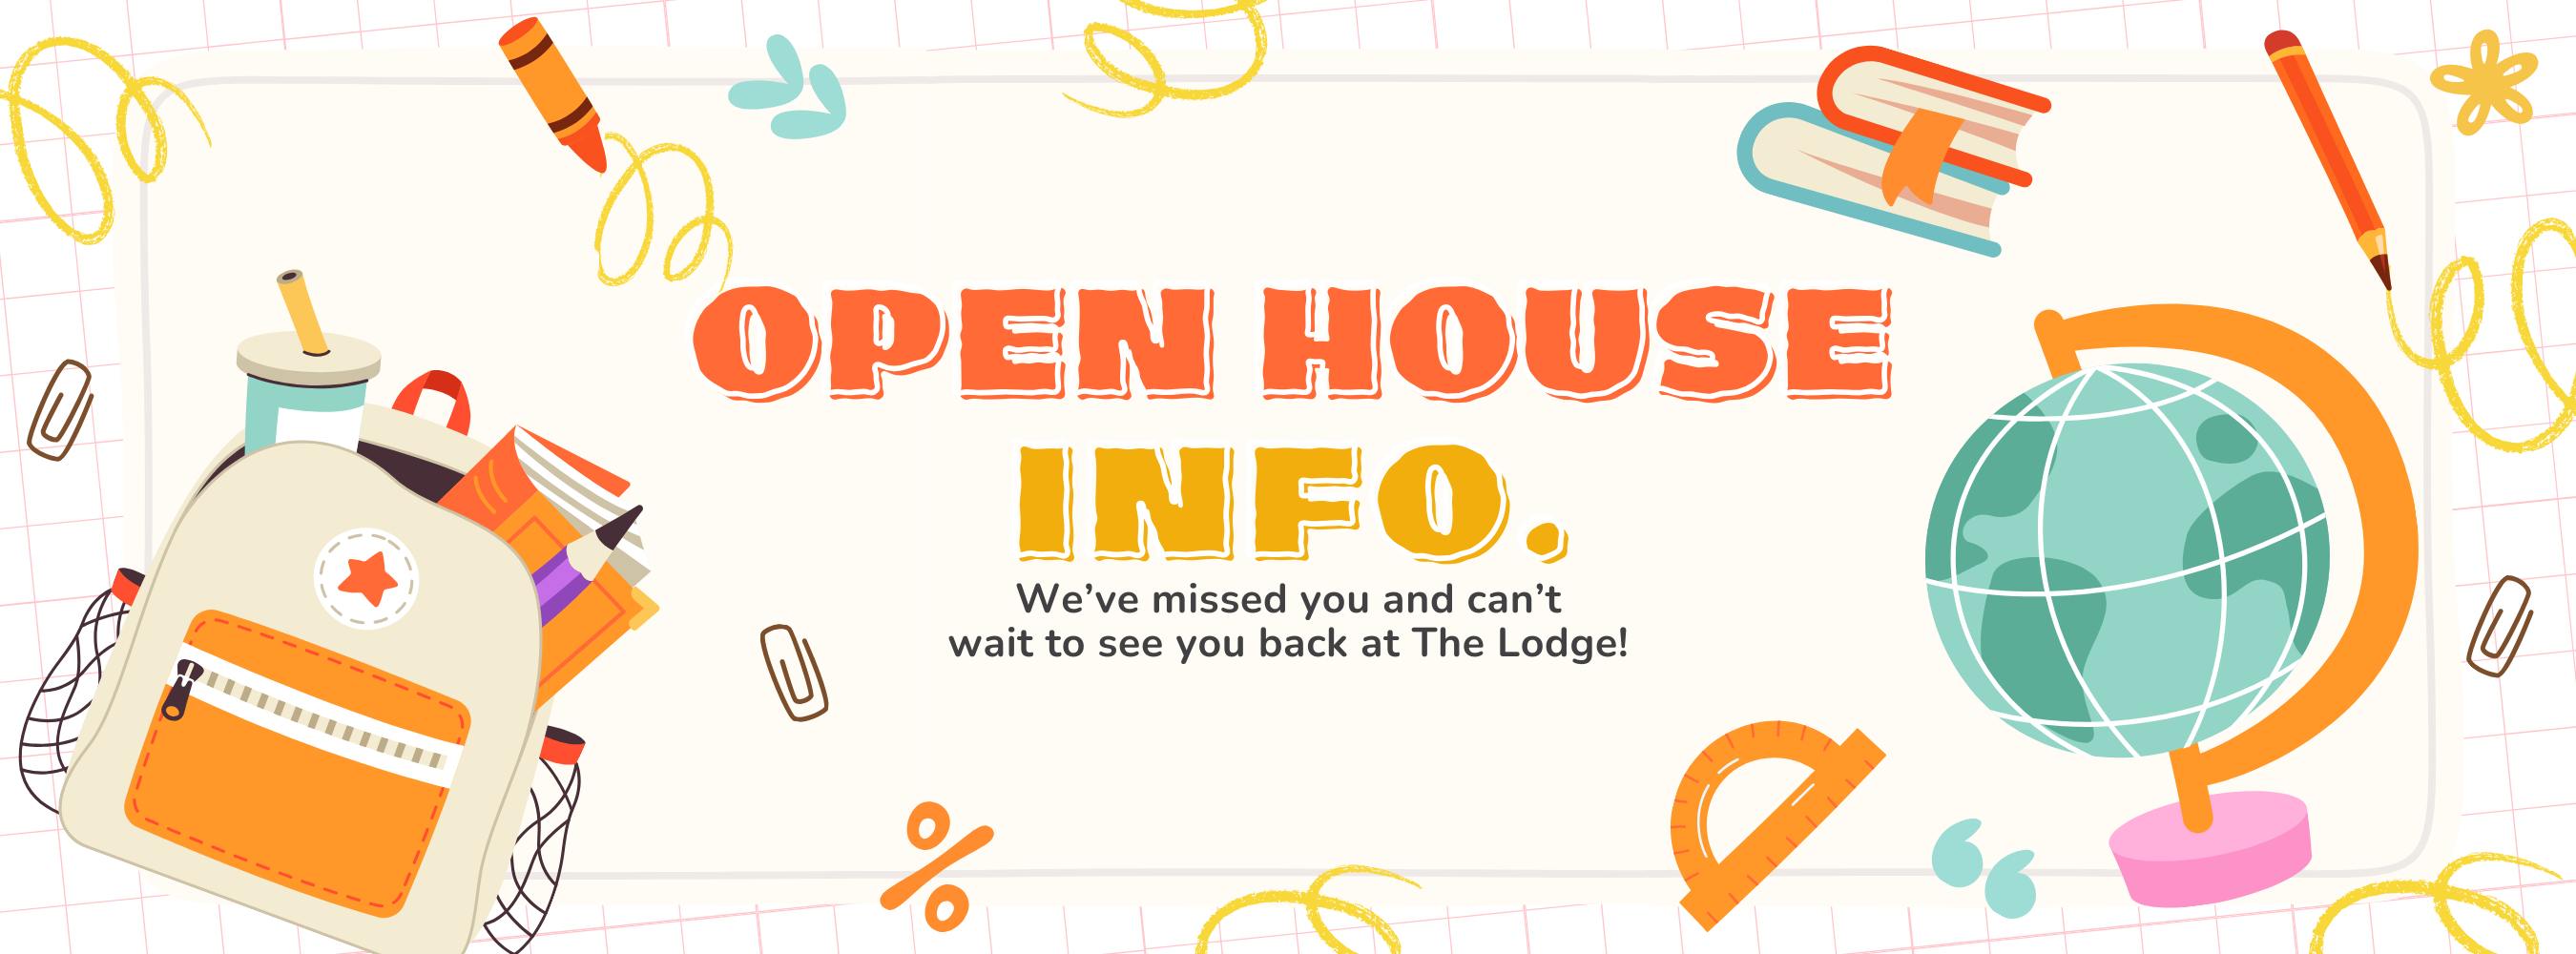 24-25 open house information